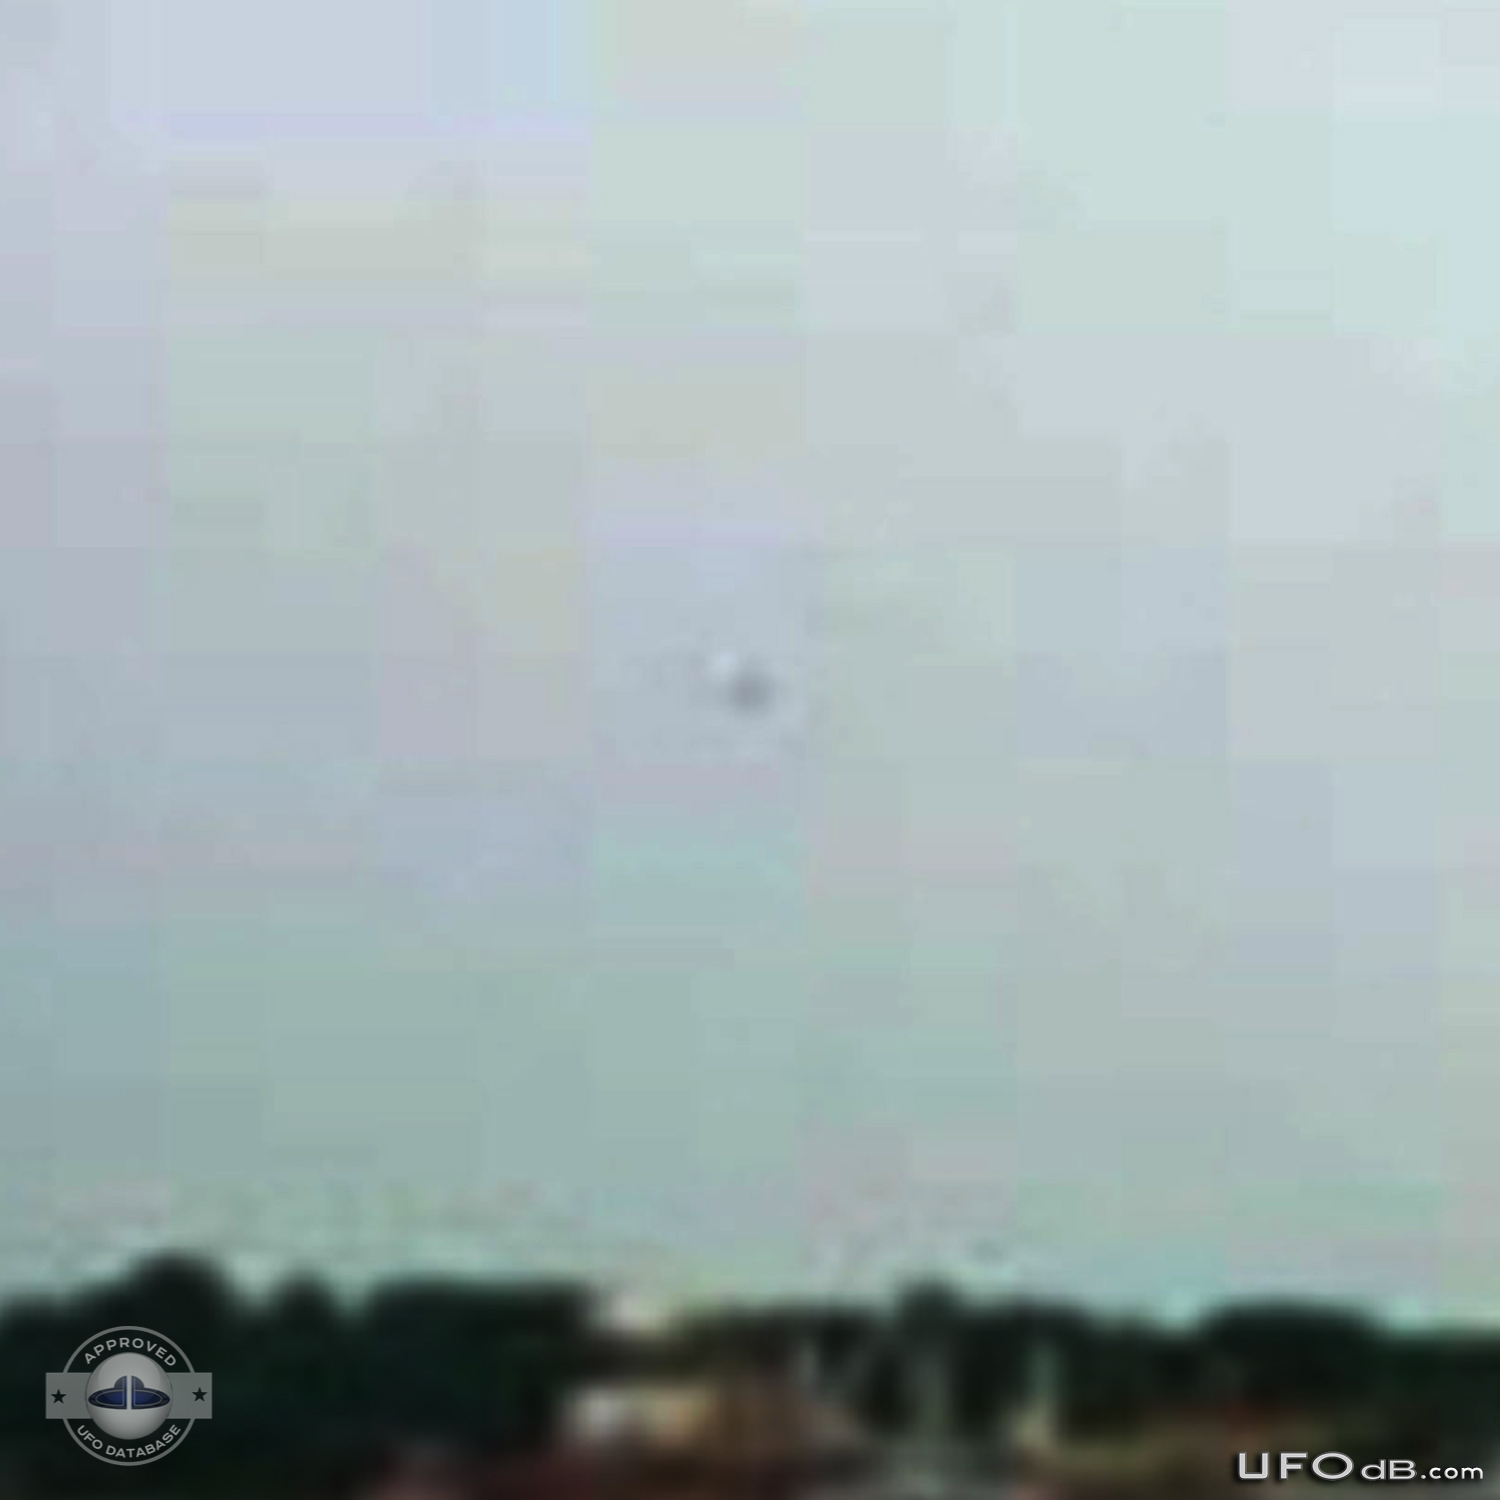 UFO caught on picture near the Resort World Sentosa in Singapore 2010 UFO Picture #393-2